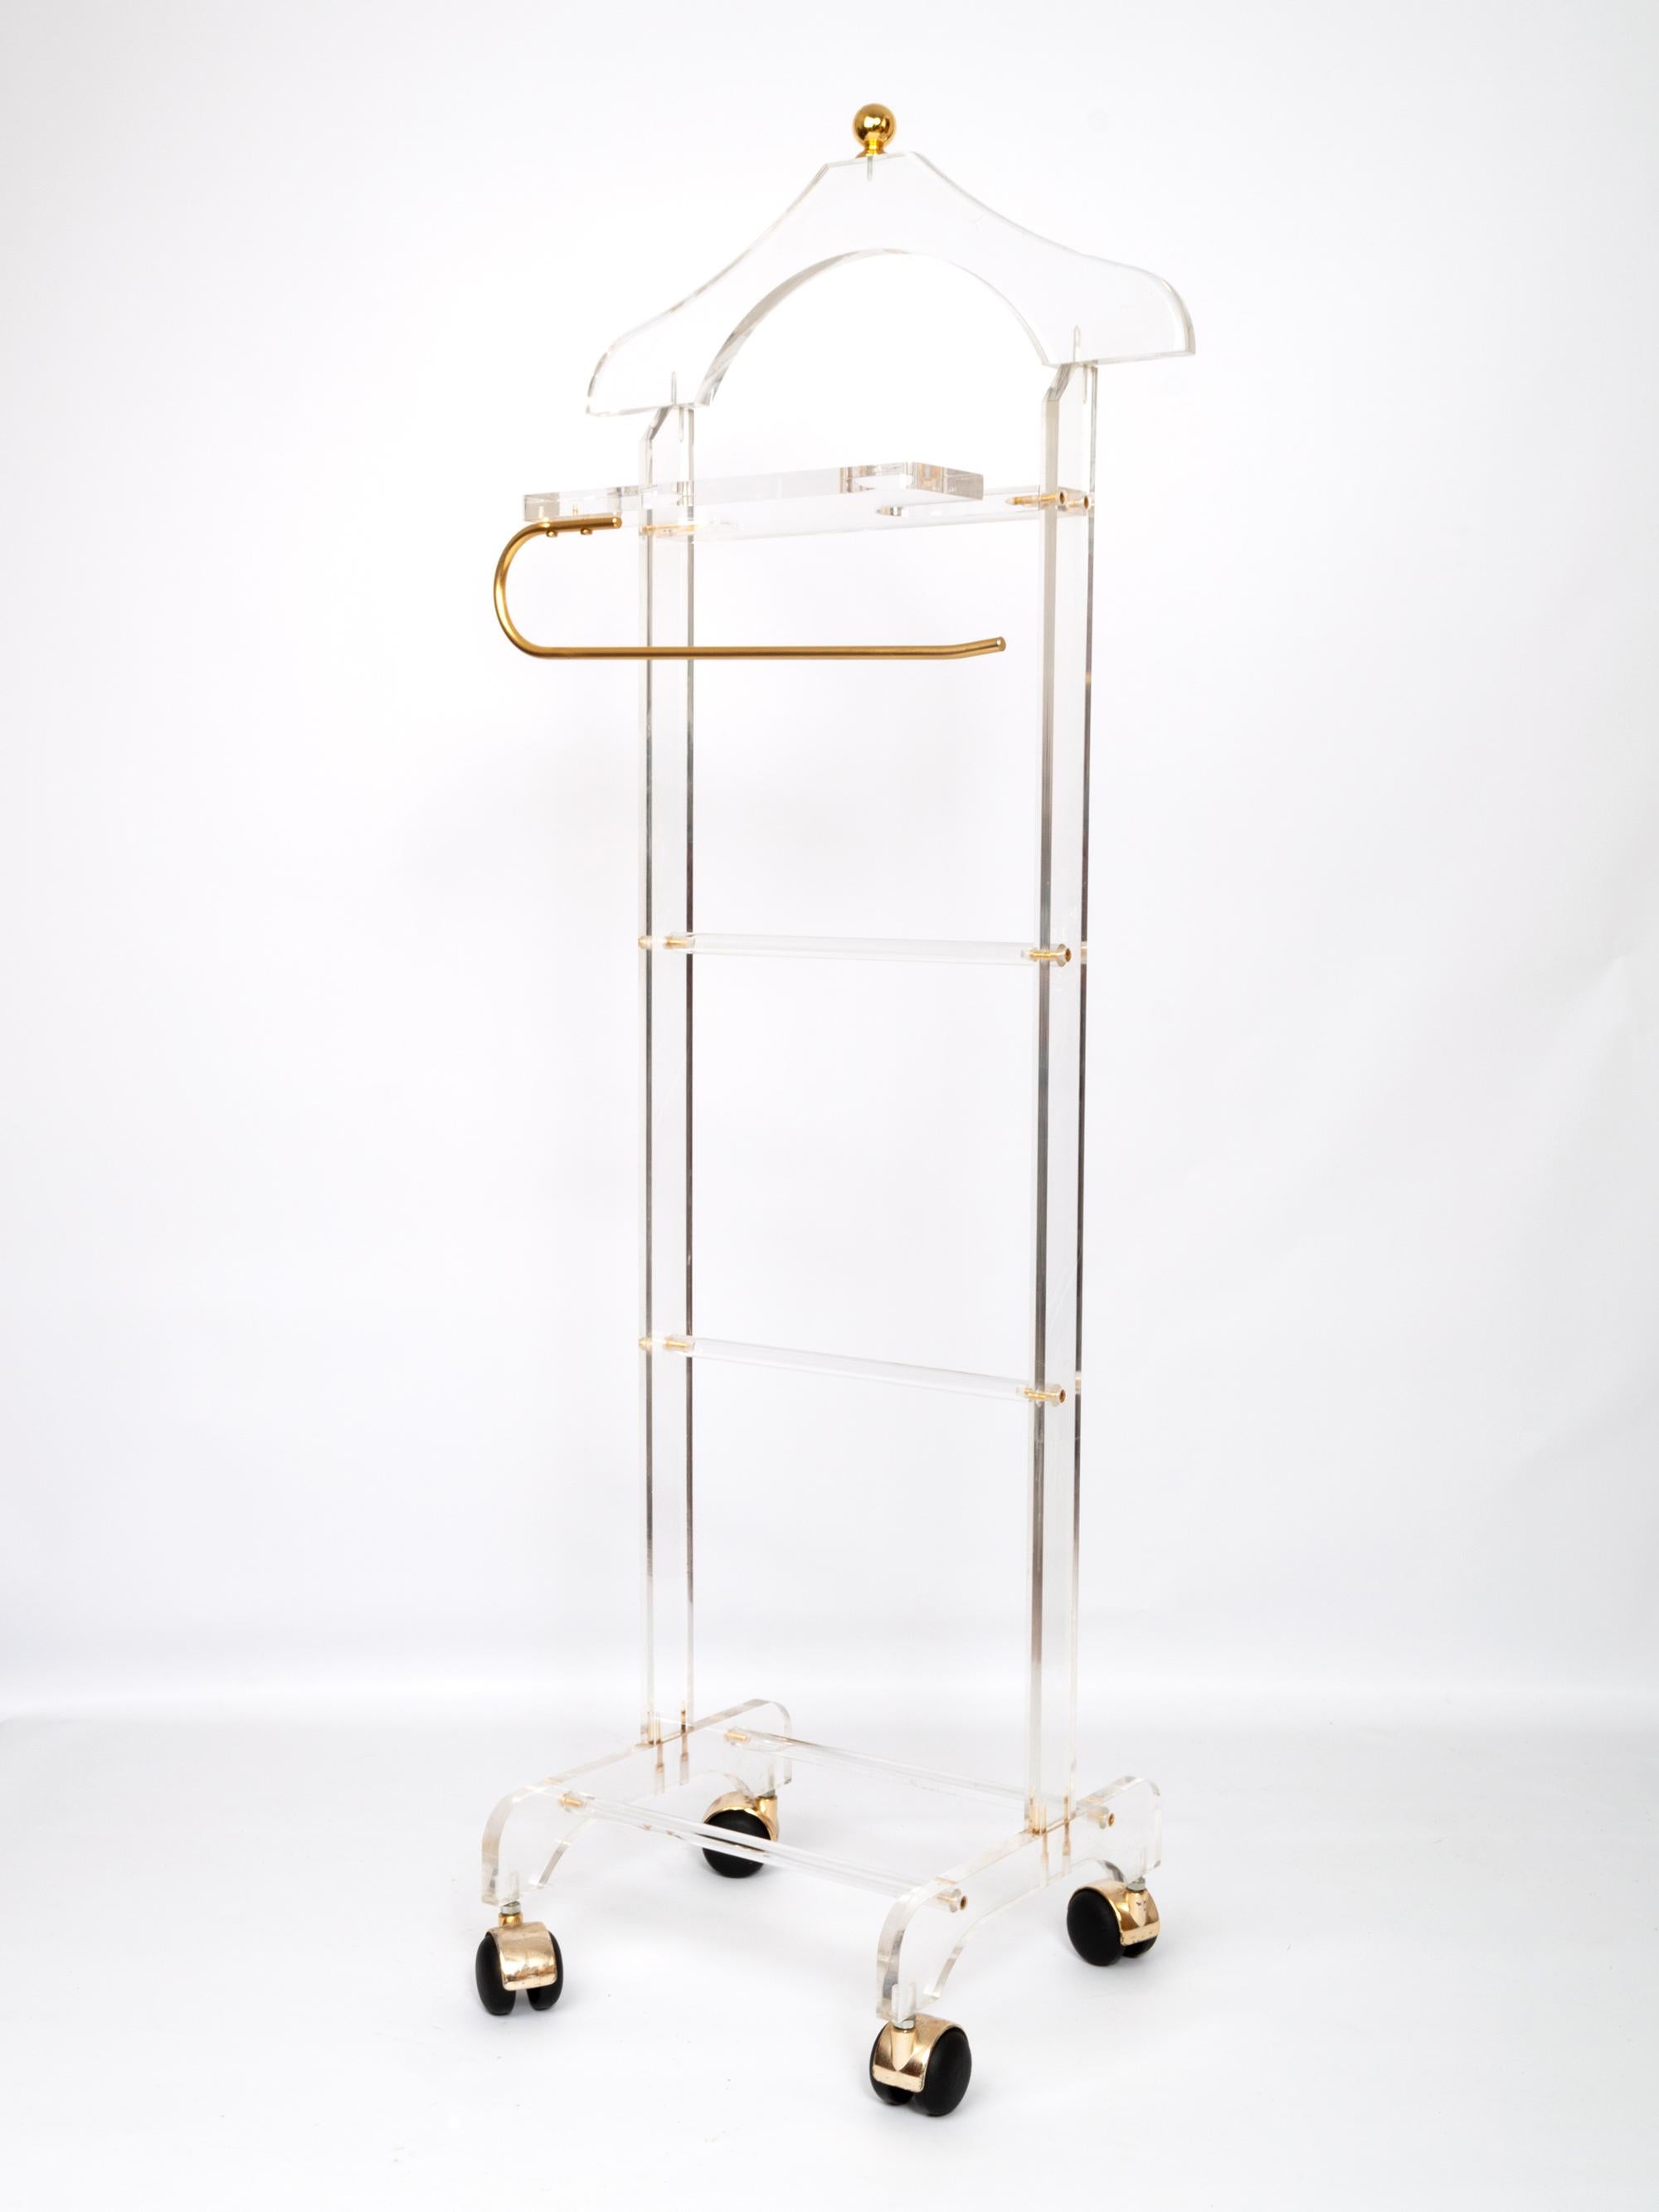 Midcentury Lucite and brass valet stand on castors, Italy, circa 1960.
In very good vintage condition commensurate of age.